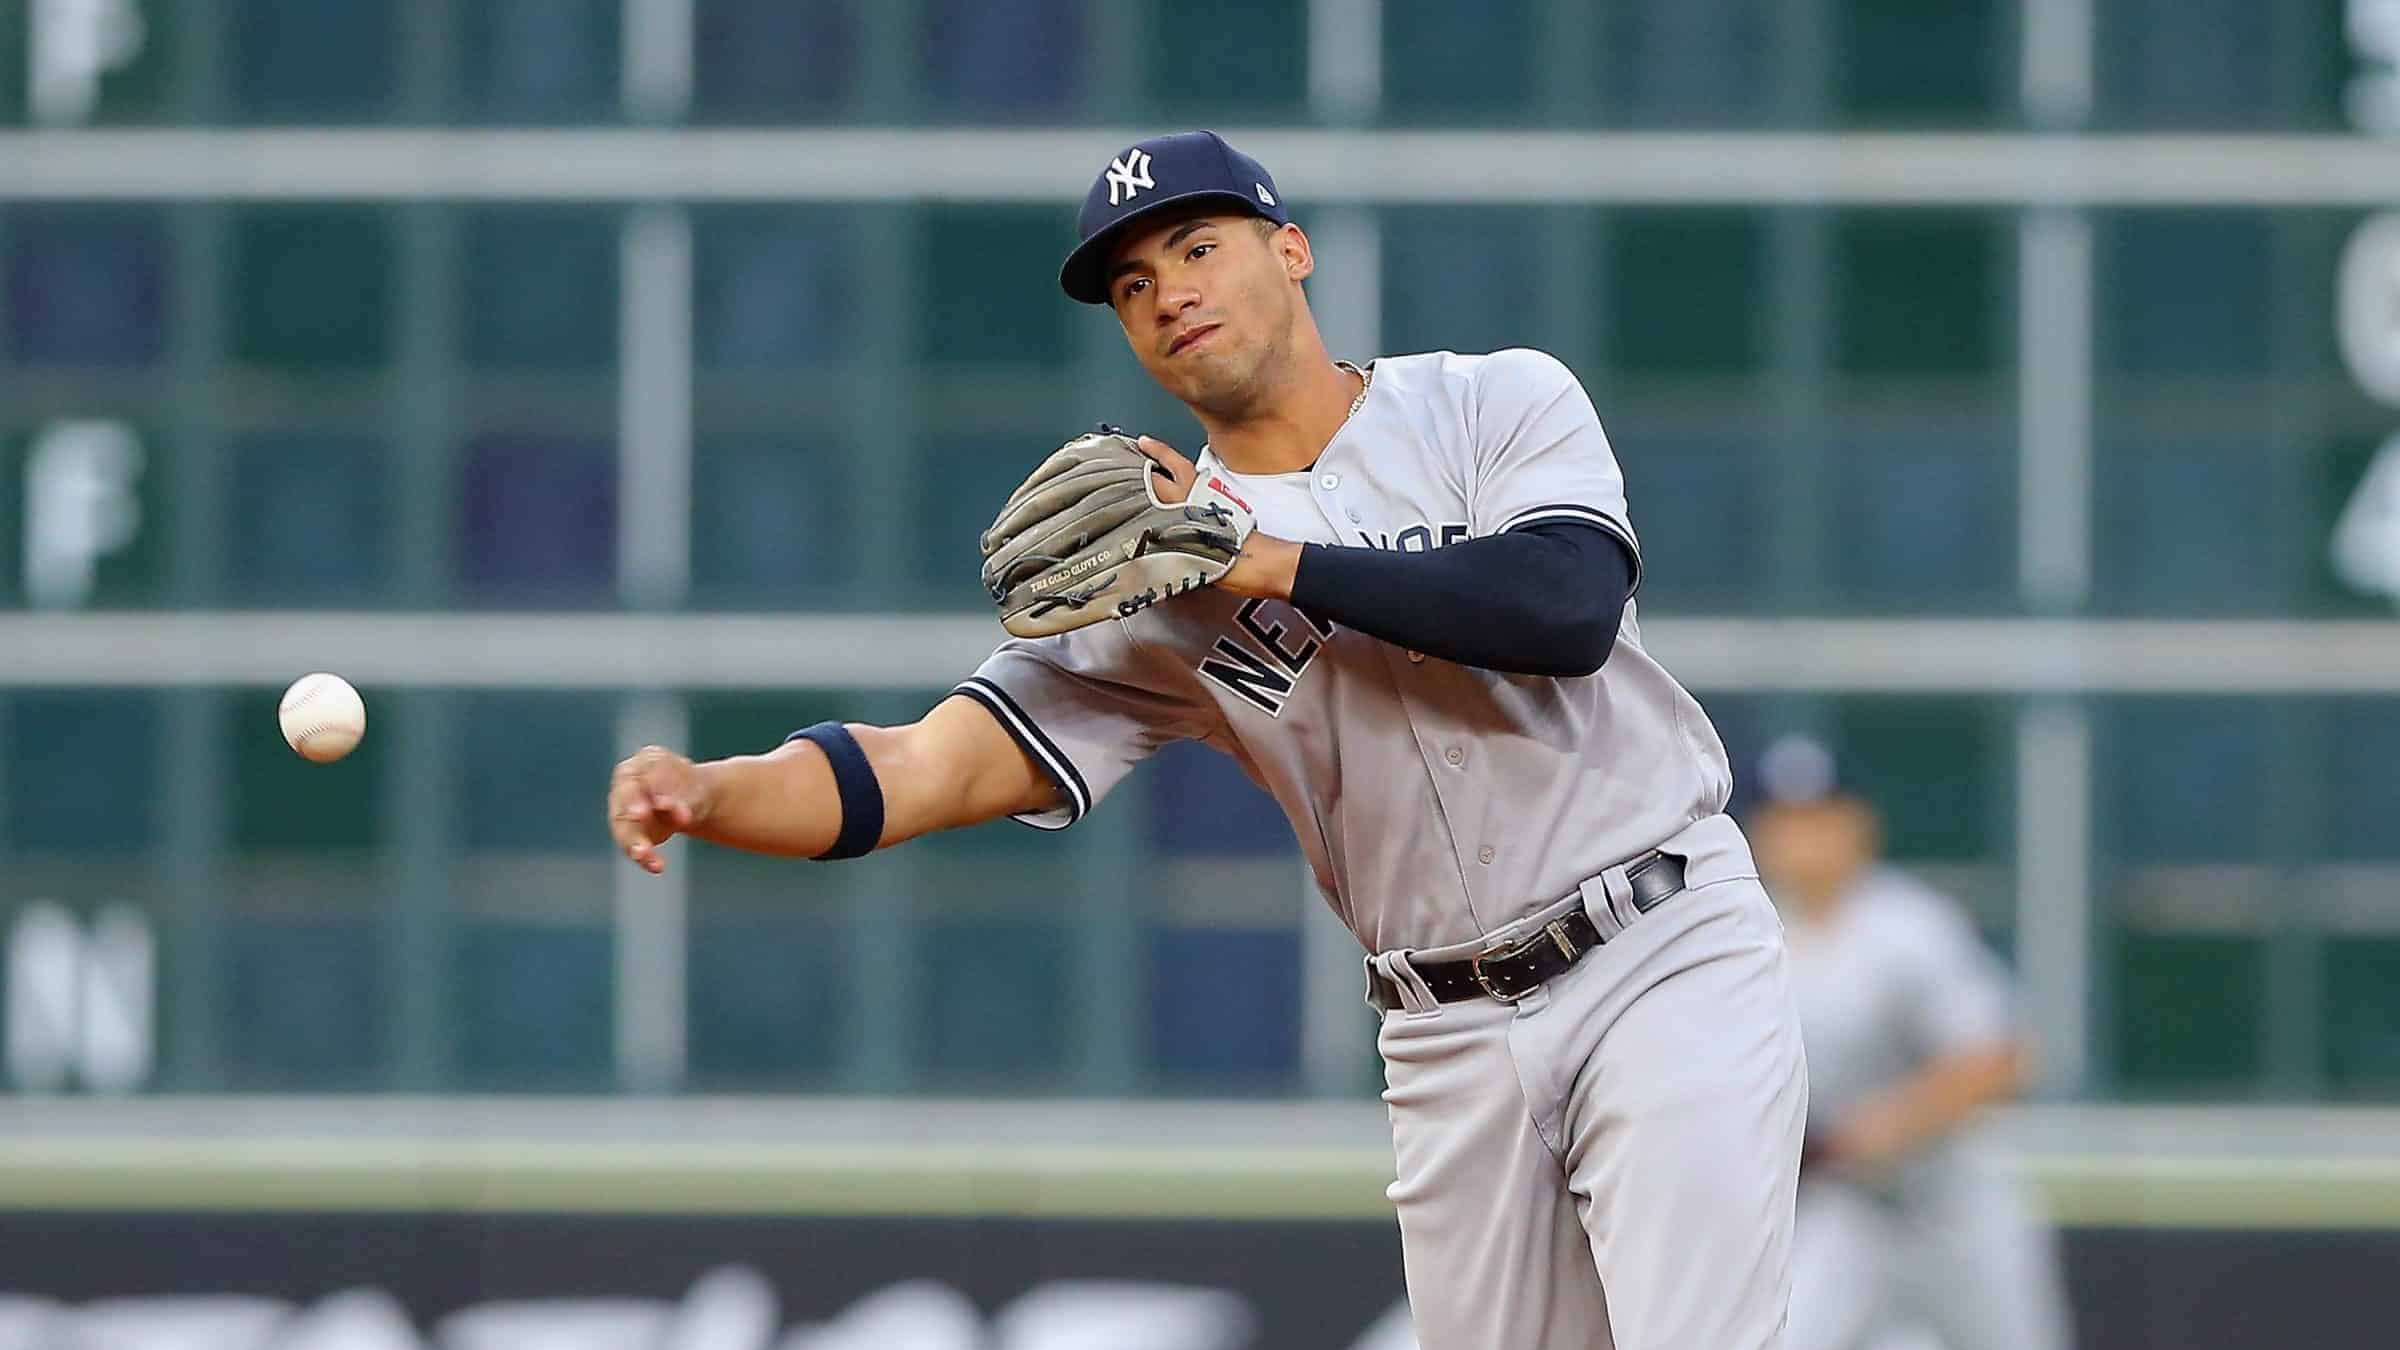 New York Yankees: Gleyber Torres to play a lot of shortstop in 2019